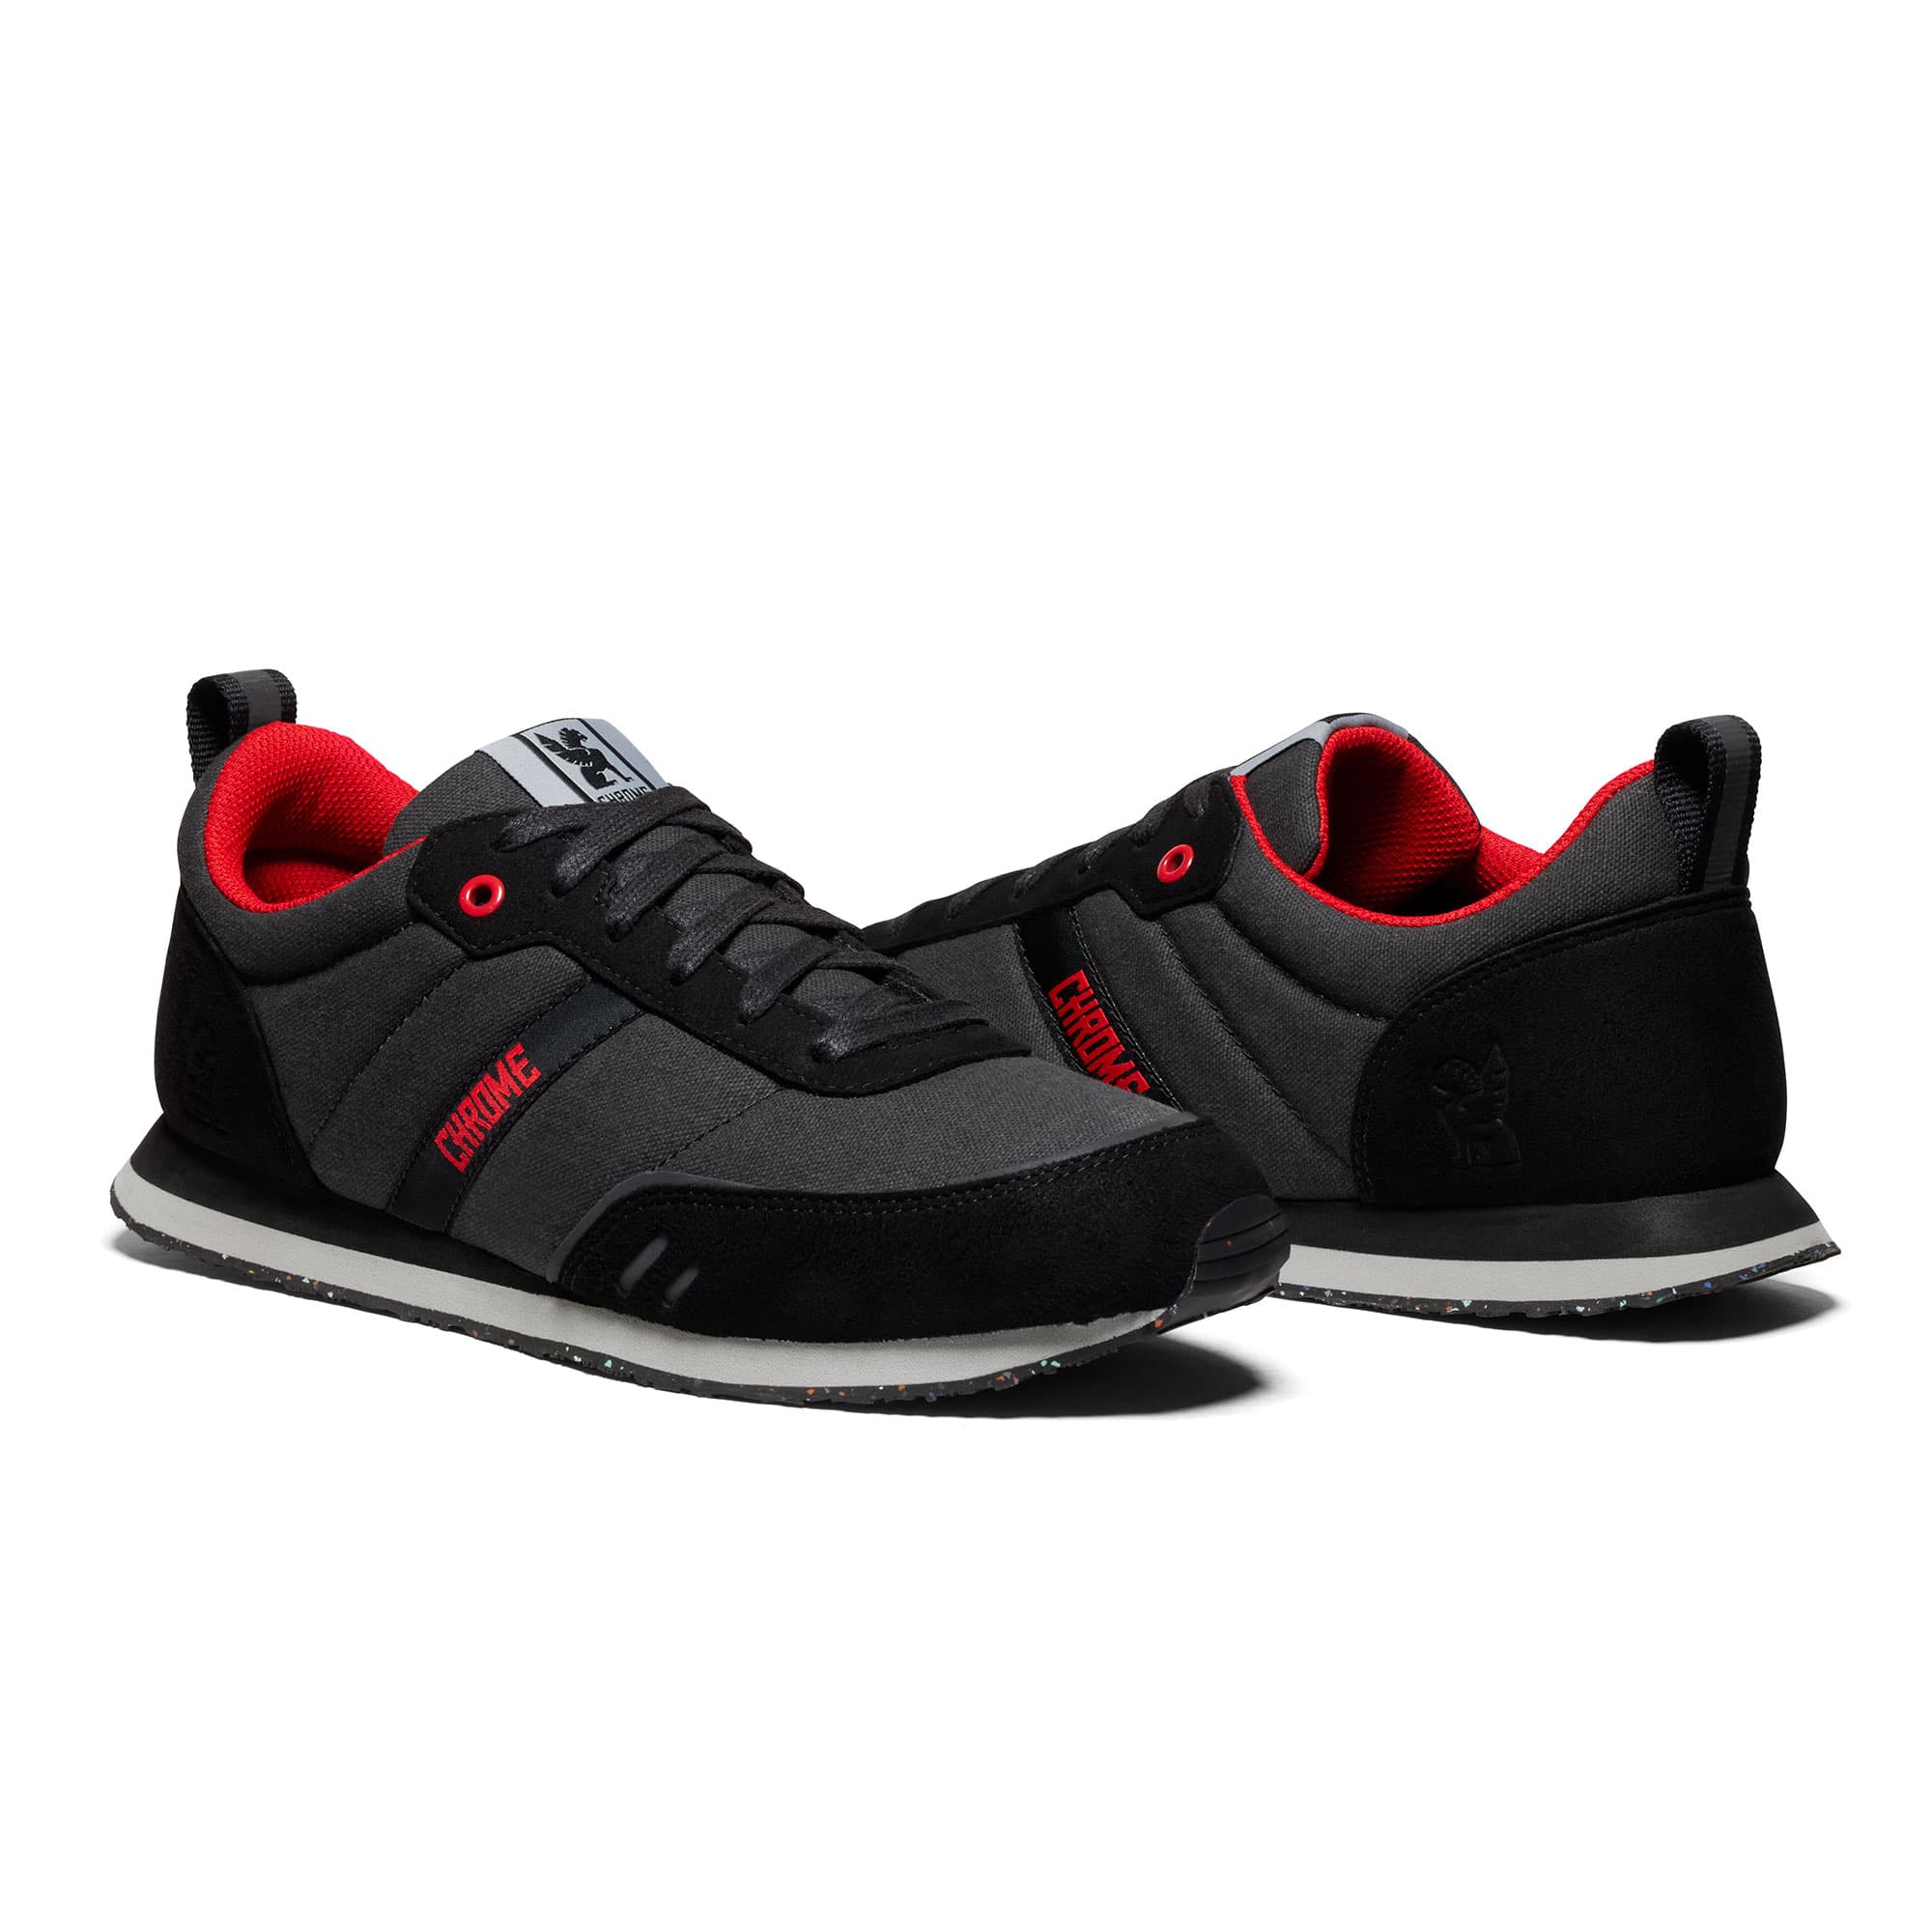 Powell sneakers side view of both shoes in black grey #color_black grey